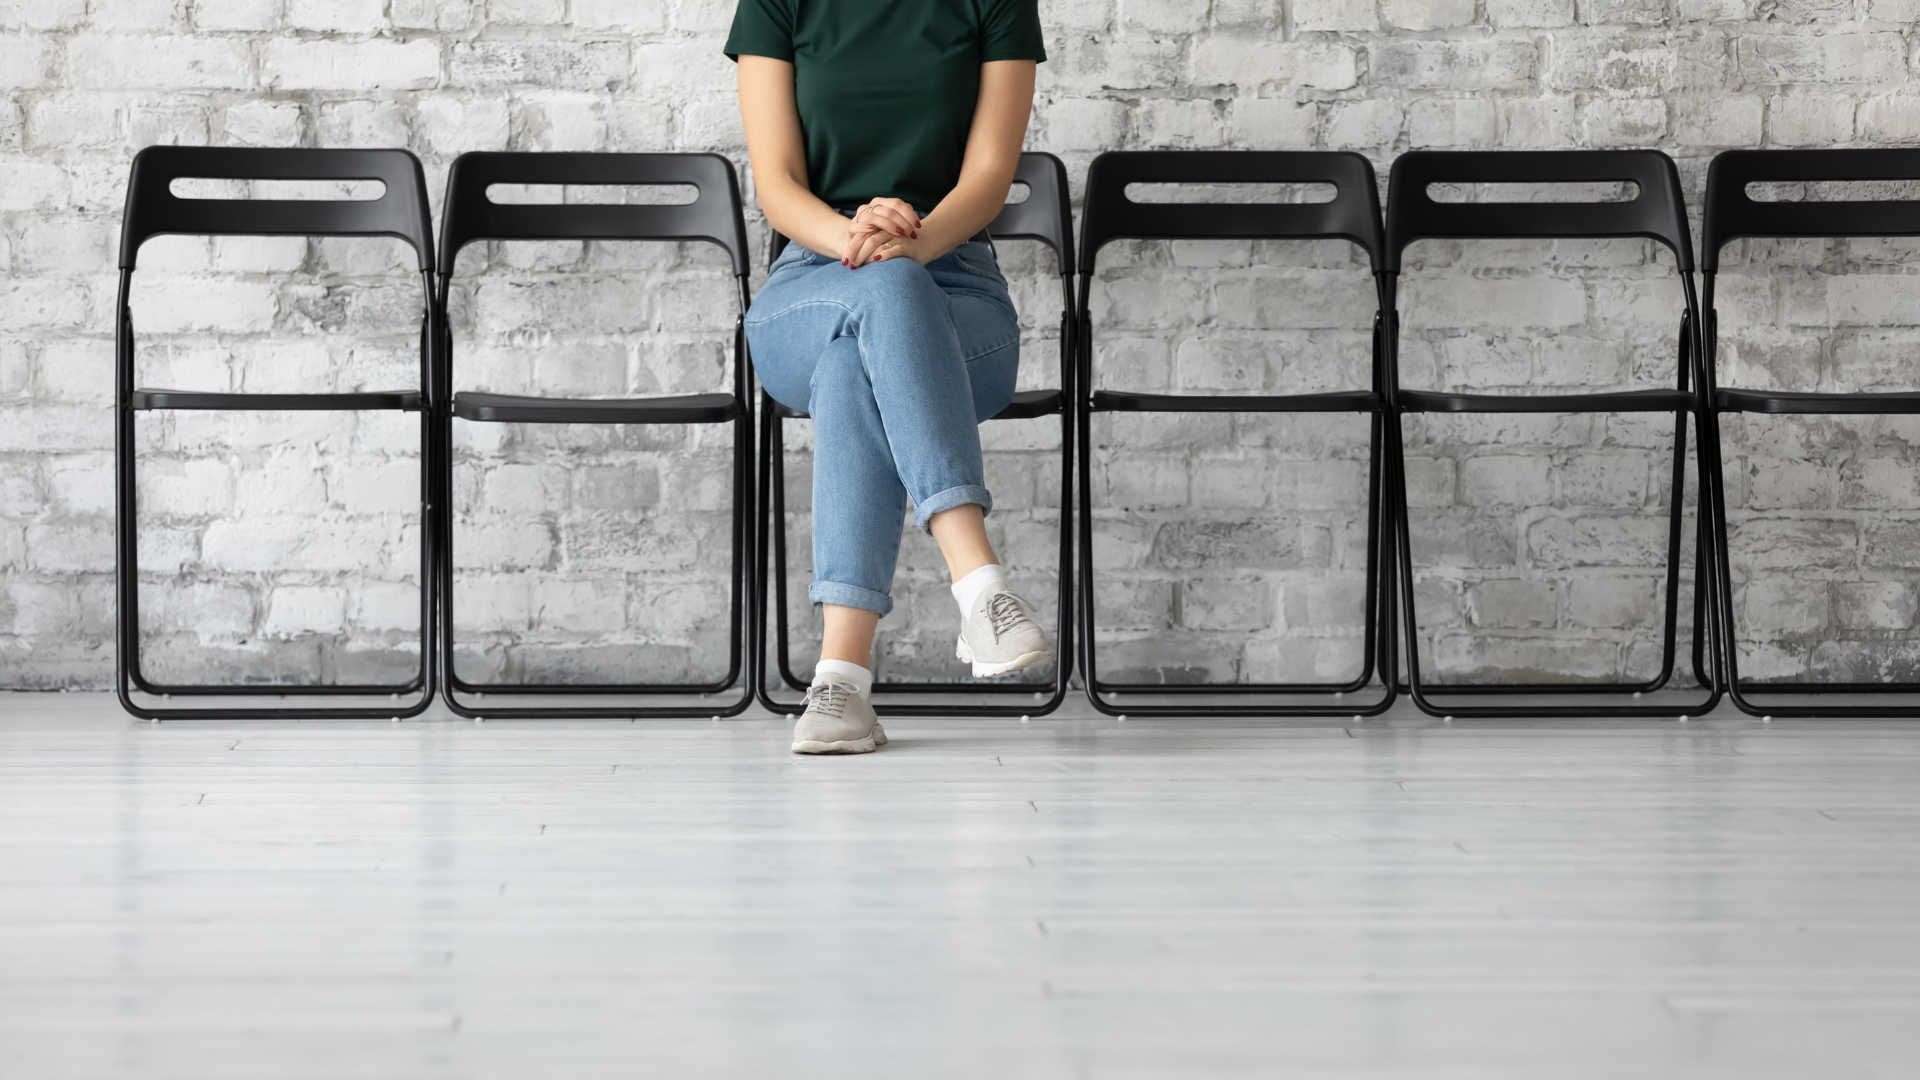 A person sits on a chair located in a row of chairs in front of a brick wall